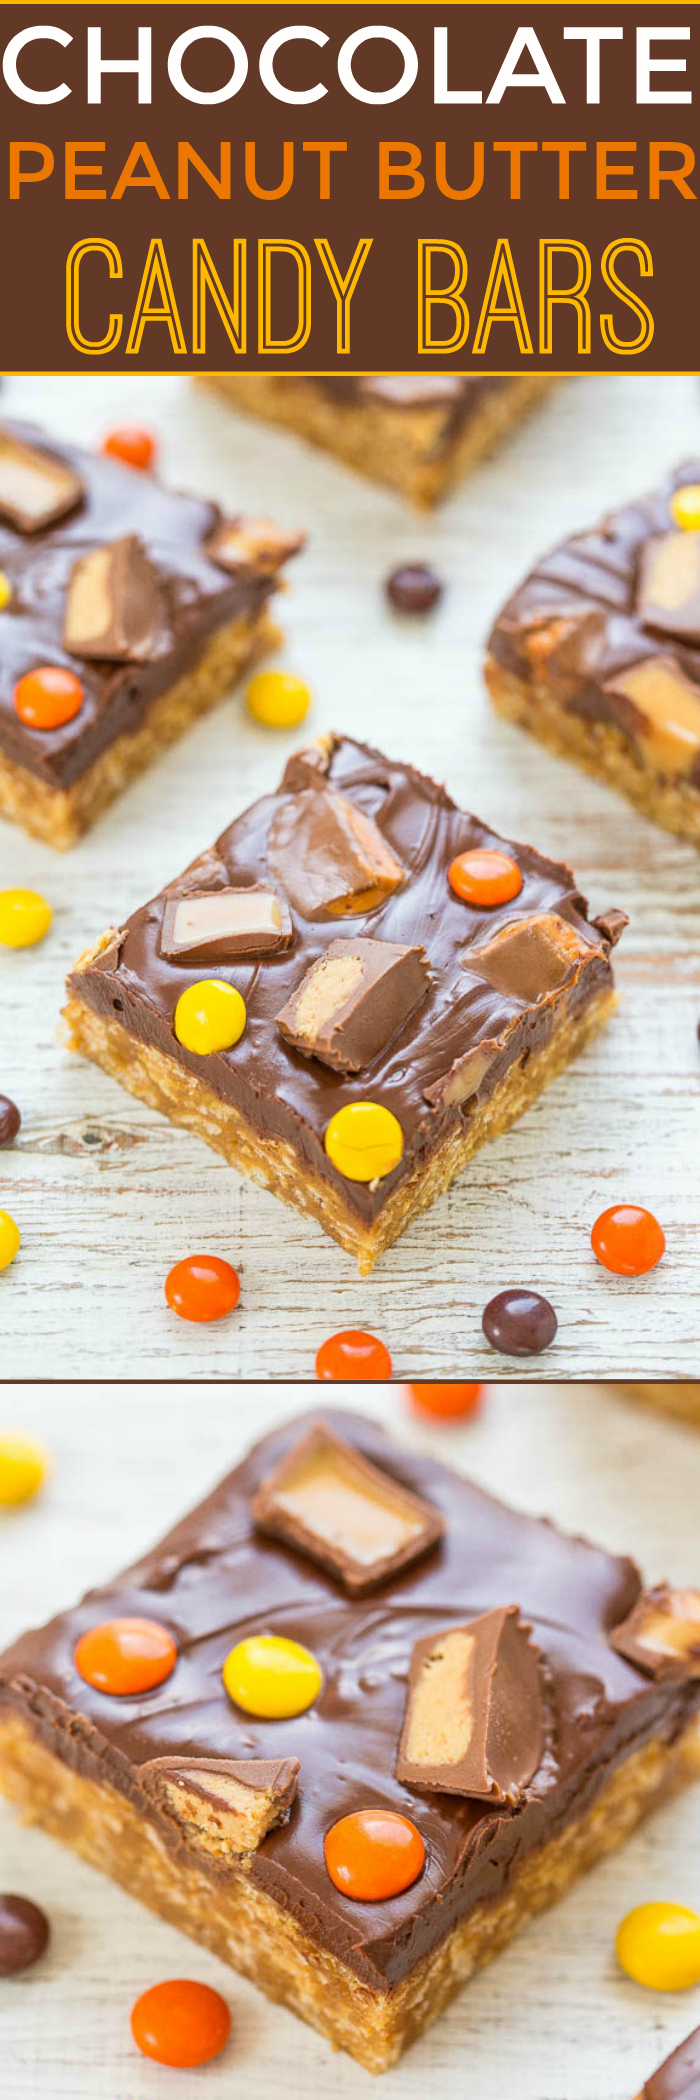 Chocolate Peanut Butter Candy Bars - Easy, no-bake, soft, chewy PEANUT BUTTER bars topped with CHOCOLATE and CANDY!! Great for using up Halloween or extra candy because you can top with any candy!!